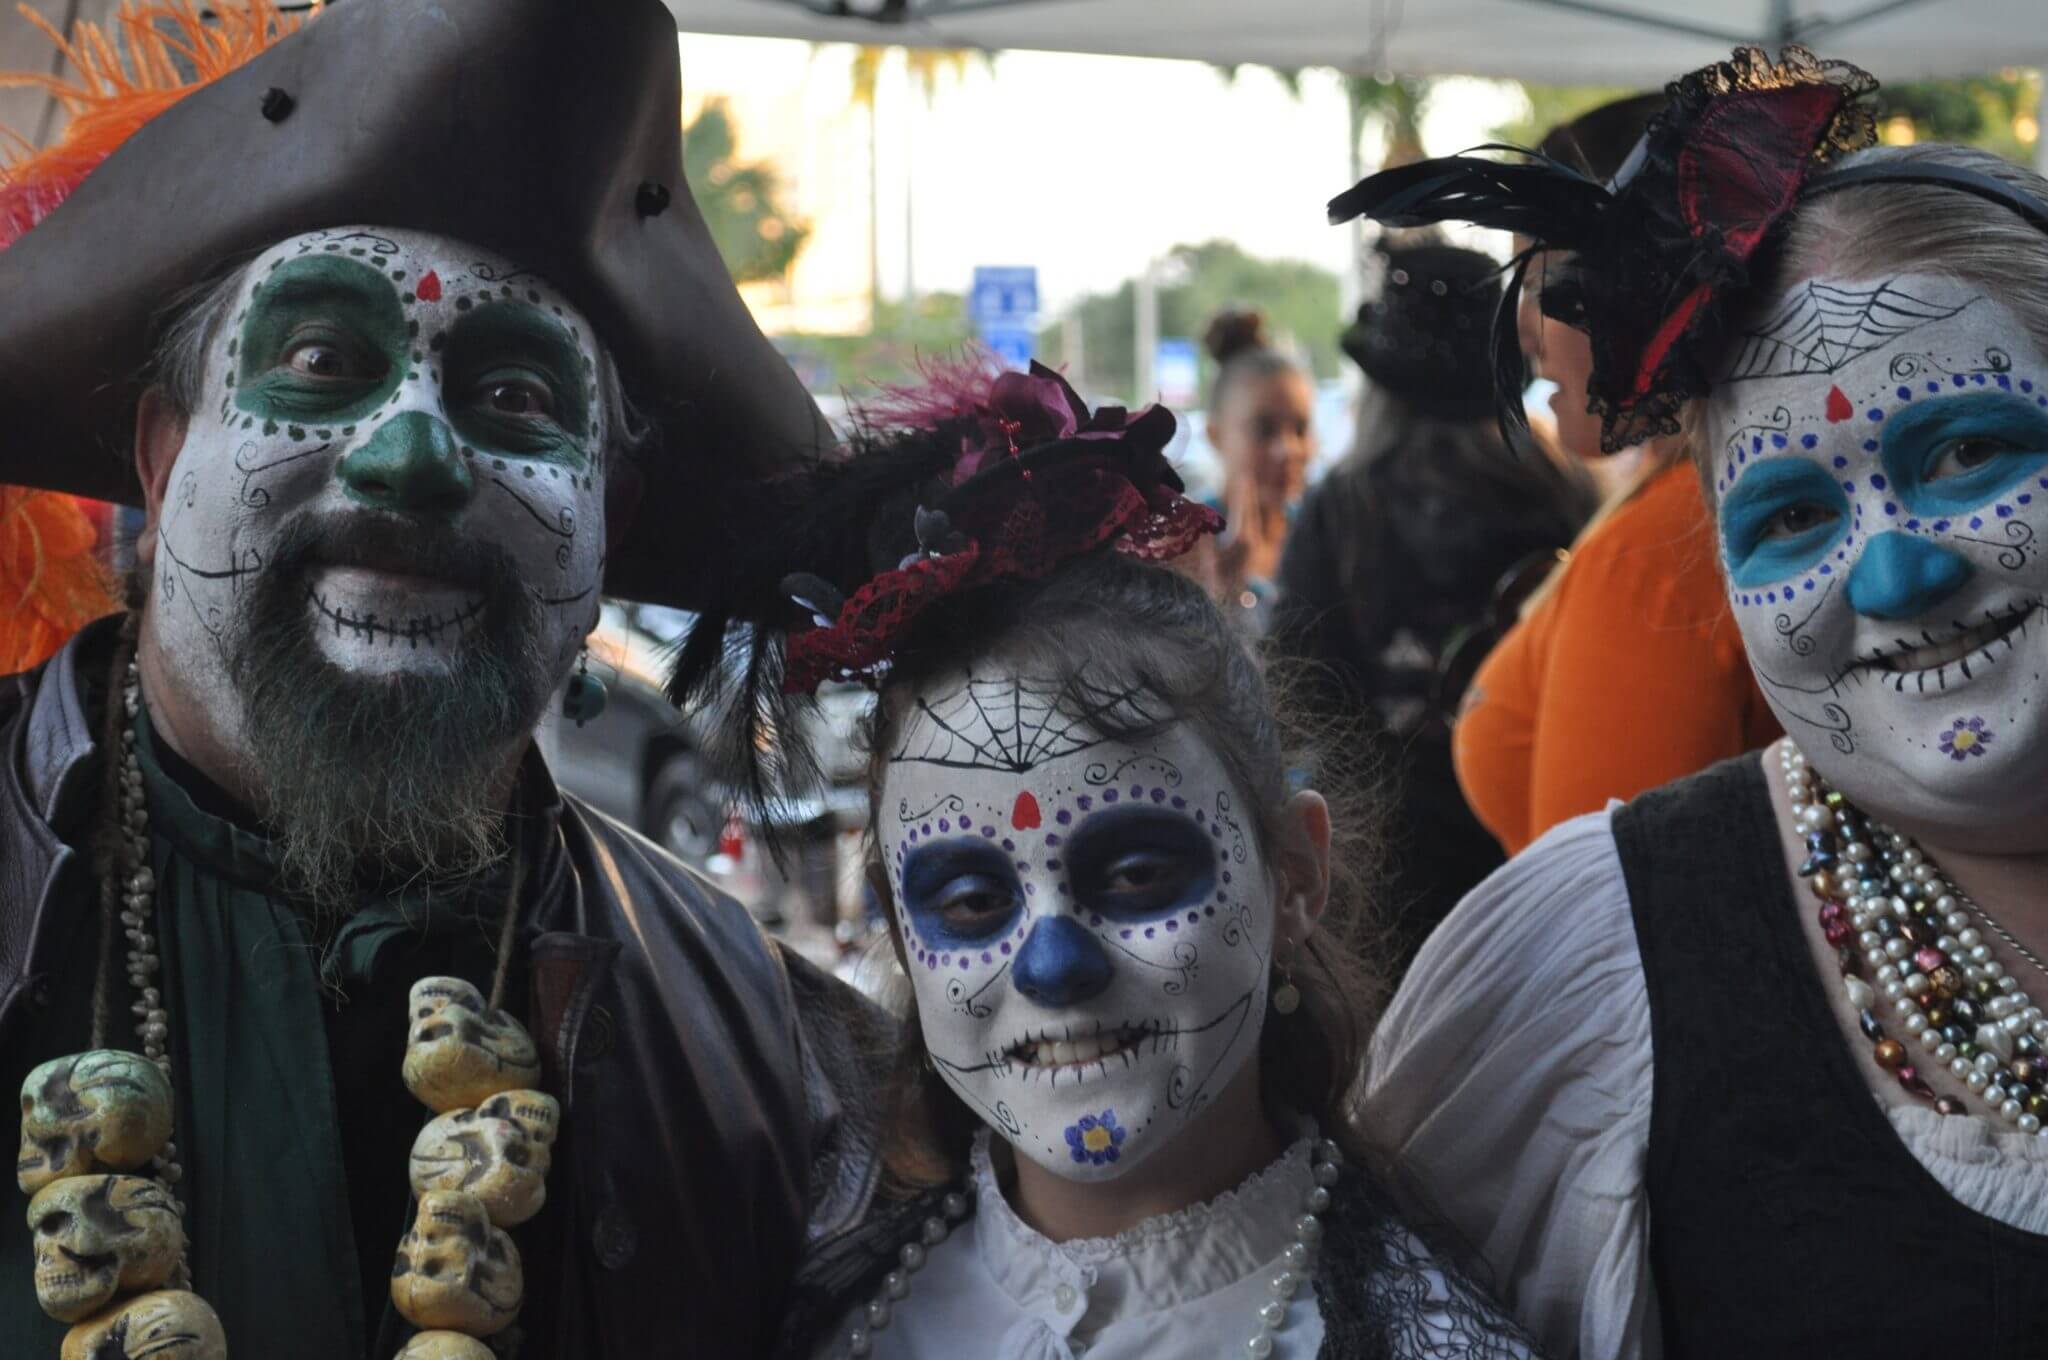 Florida Day of the Dead, November 2nd in Downtown Ft. Lauderdale - www.HuntingforRubies